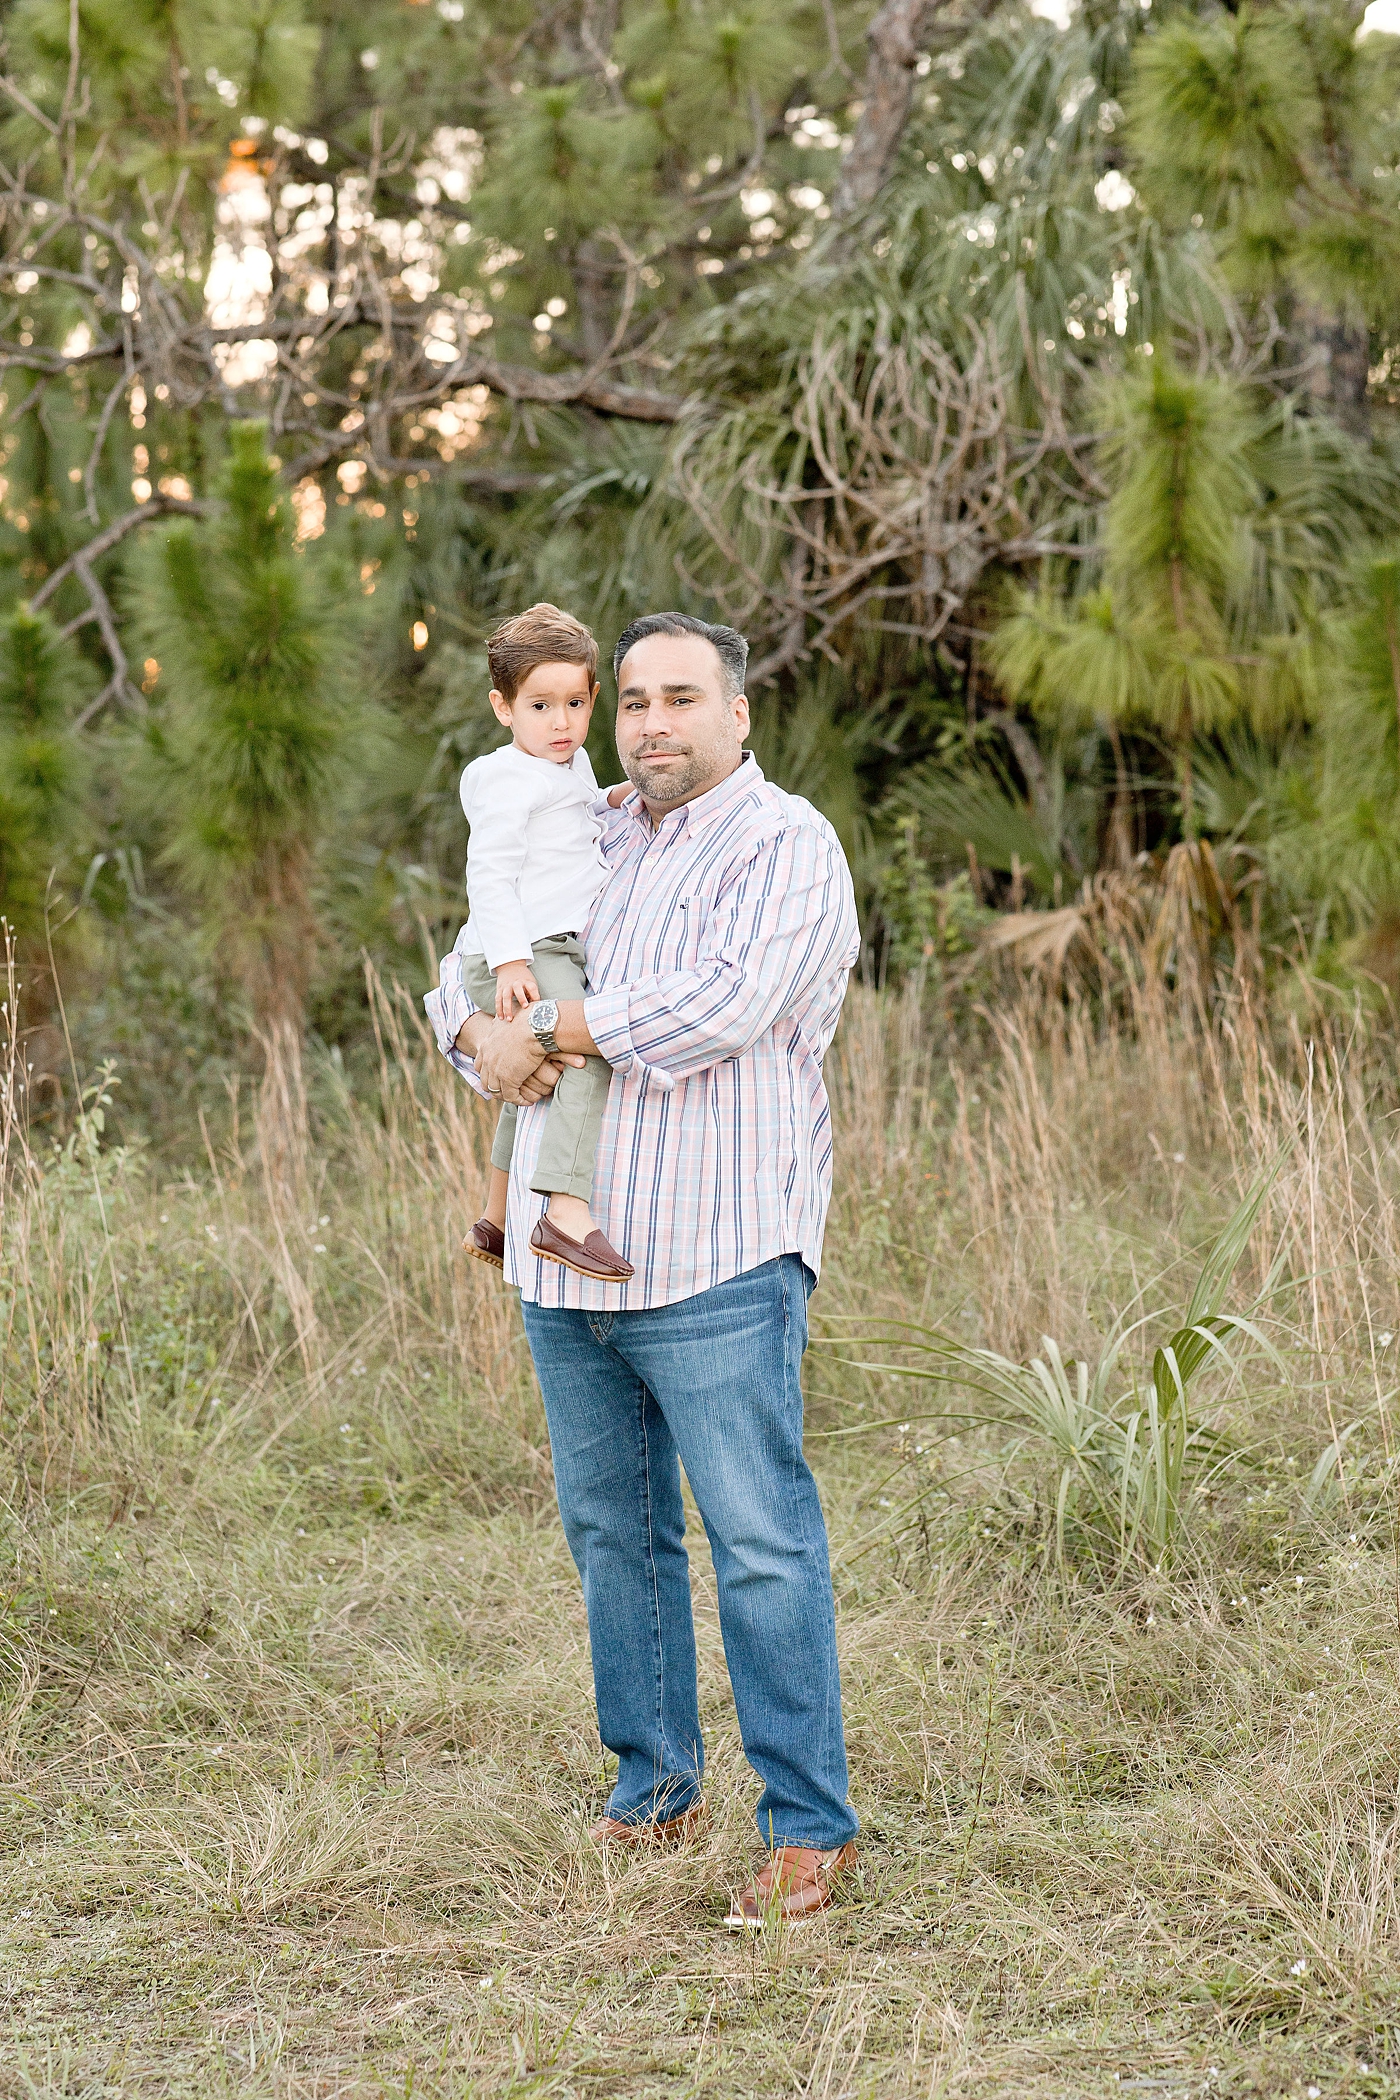 Dad holds his son in his arms for portrait. Photo by Ivanna Vidal Photography.